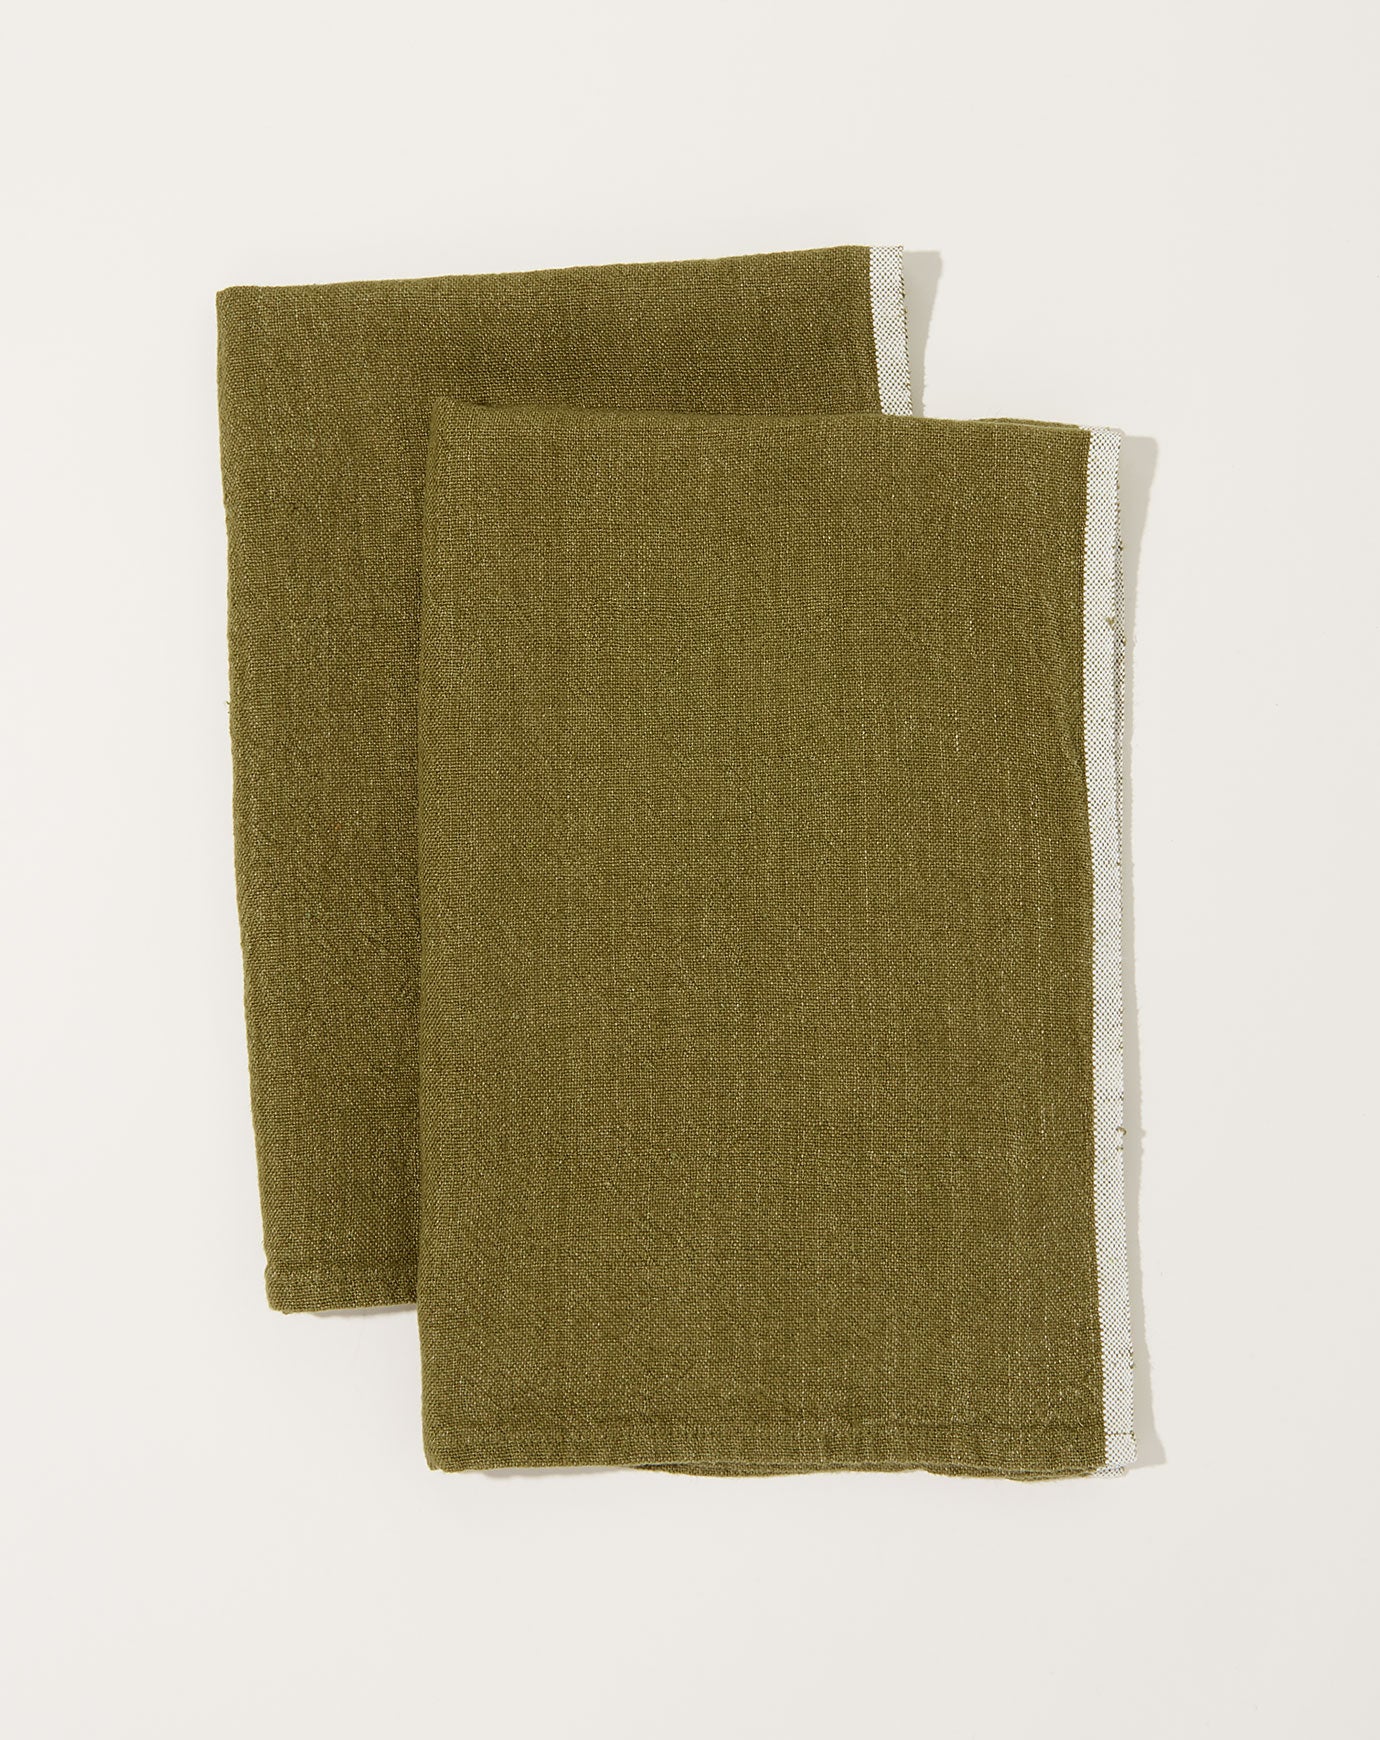 Caravan Chunky Linen Towels in Forest Green, Set of 2